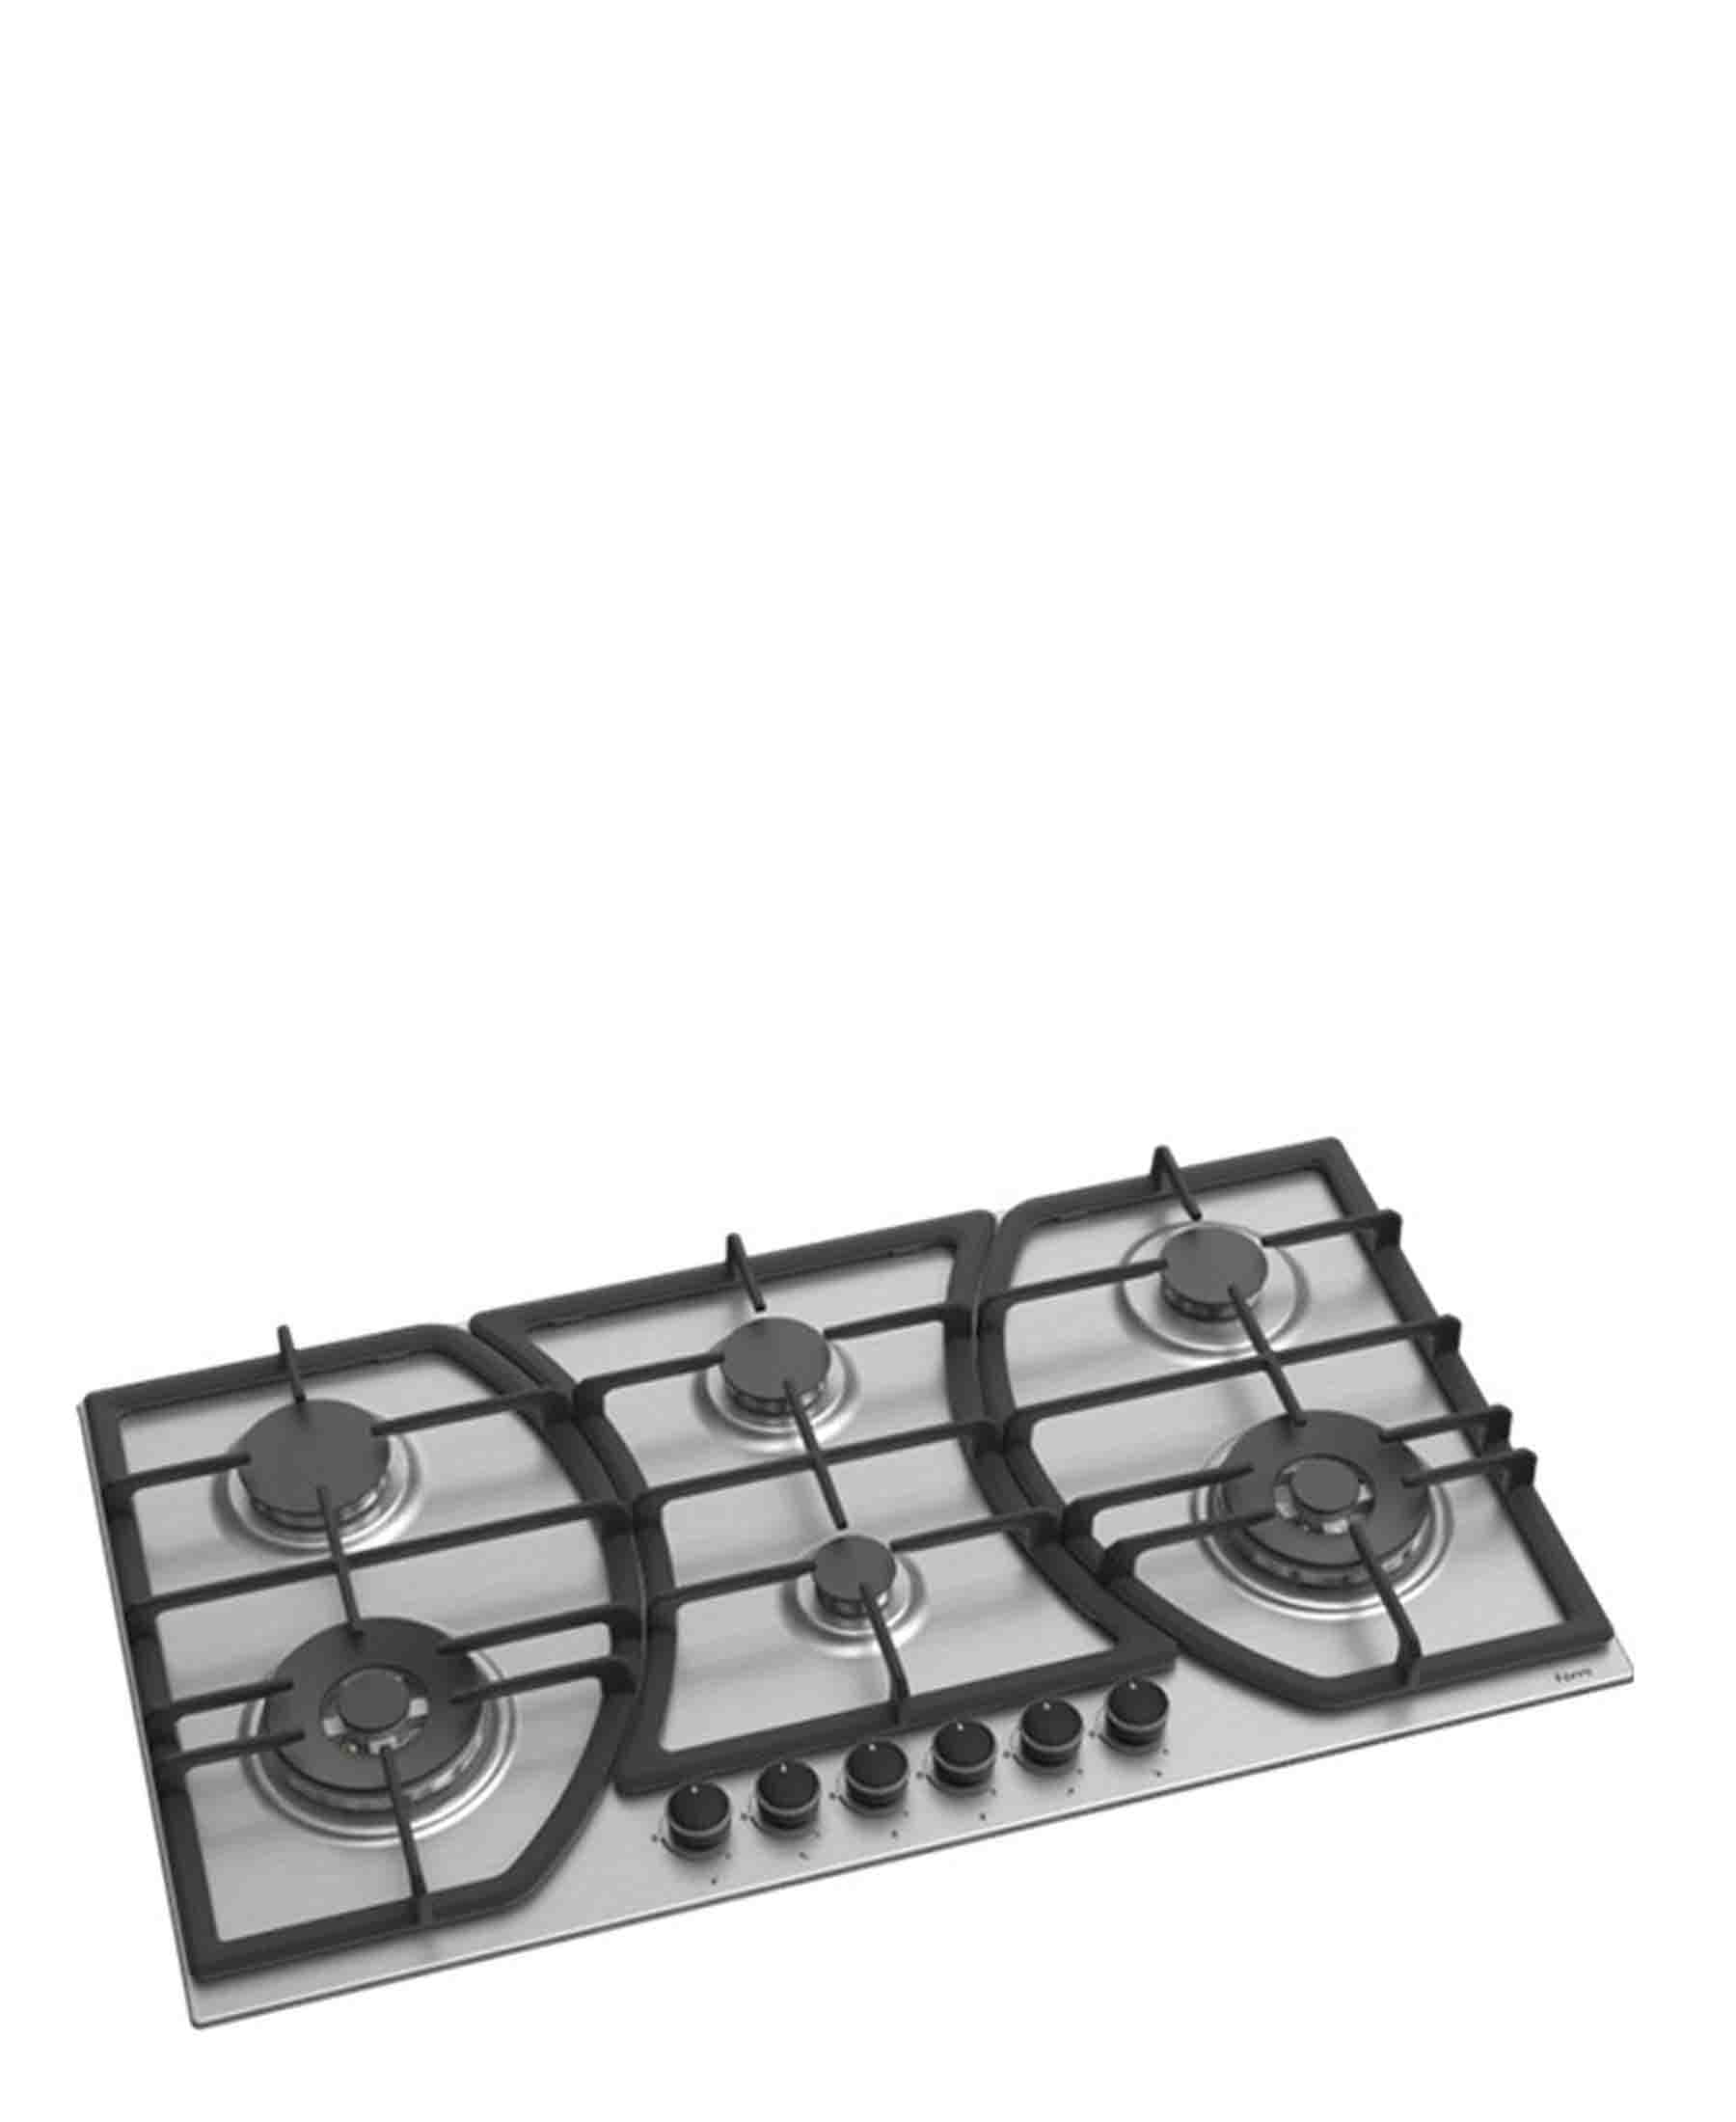 Ferre 90cm Stainless Steel Gas Hob - Silver